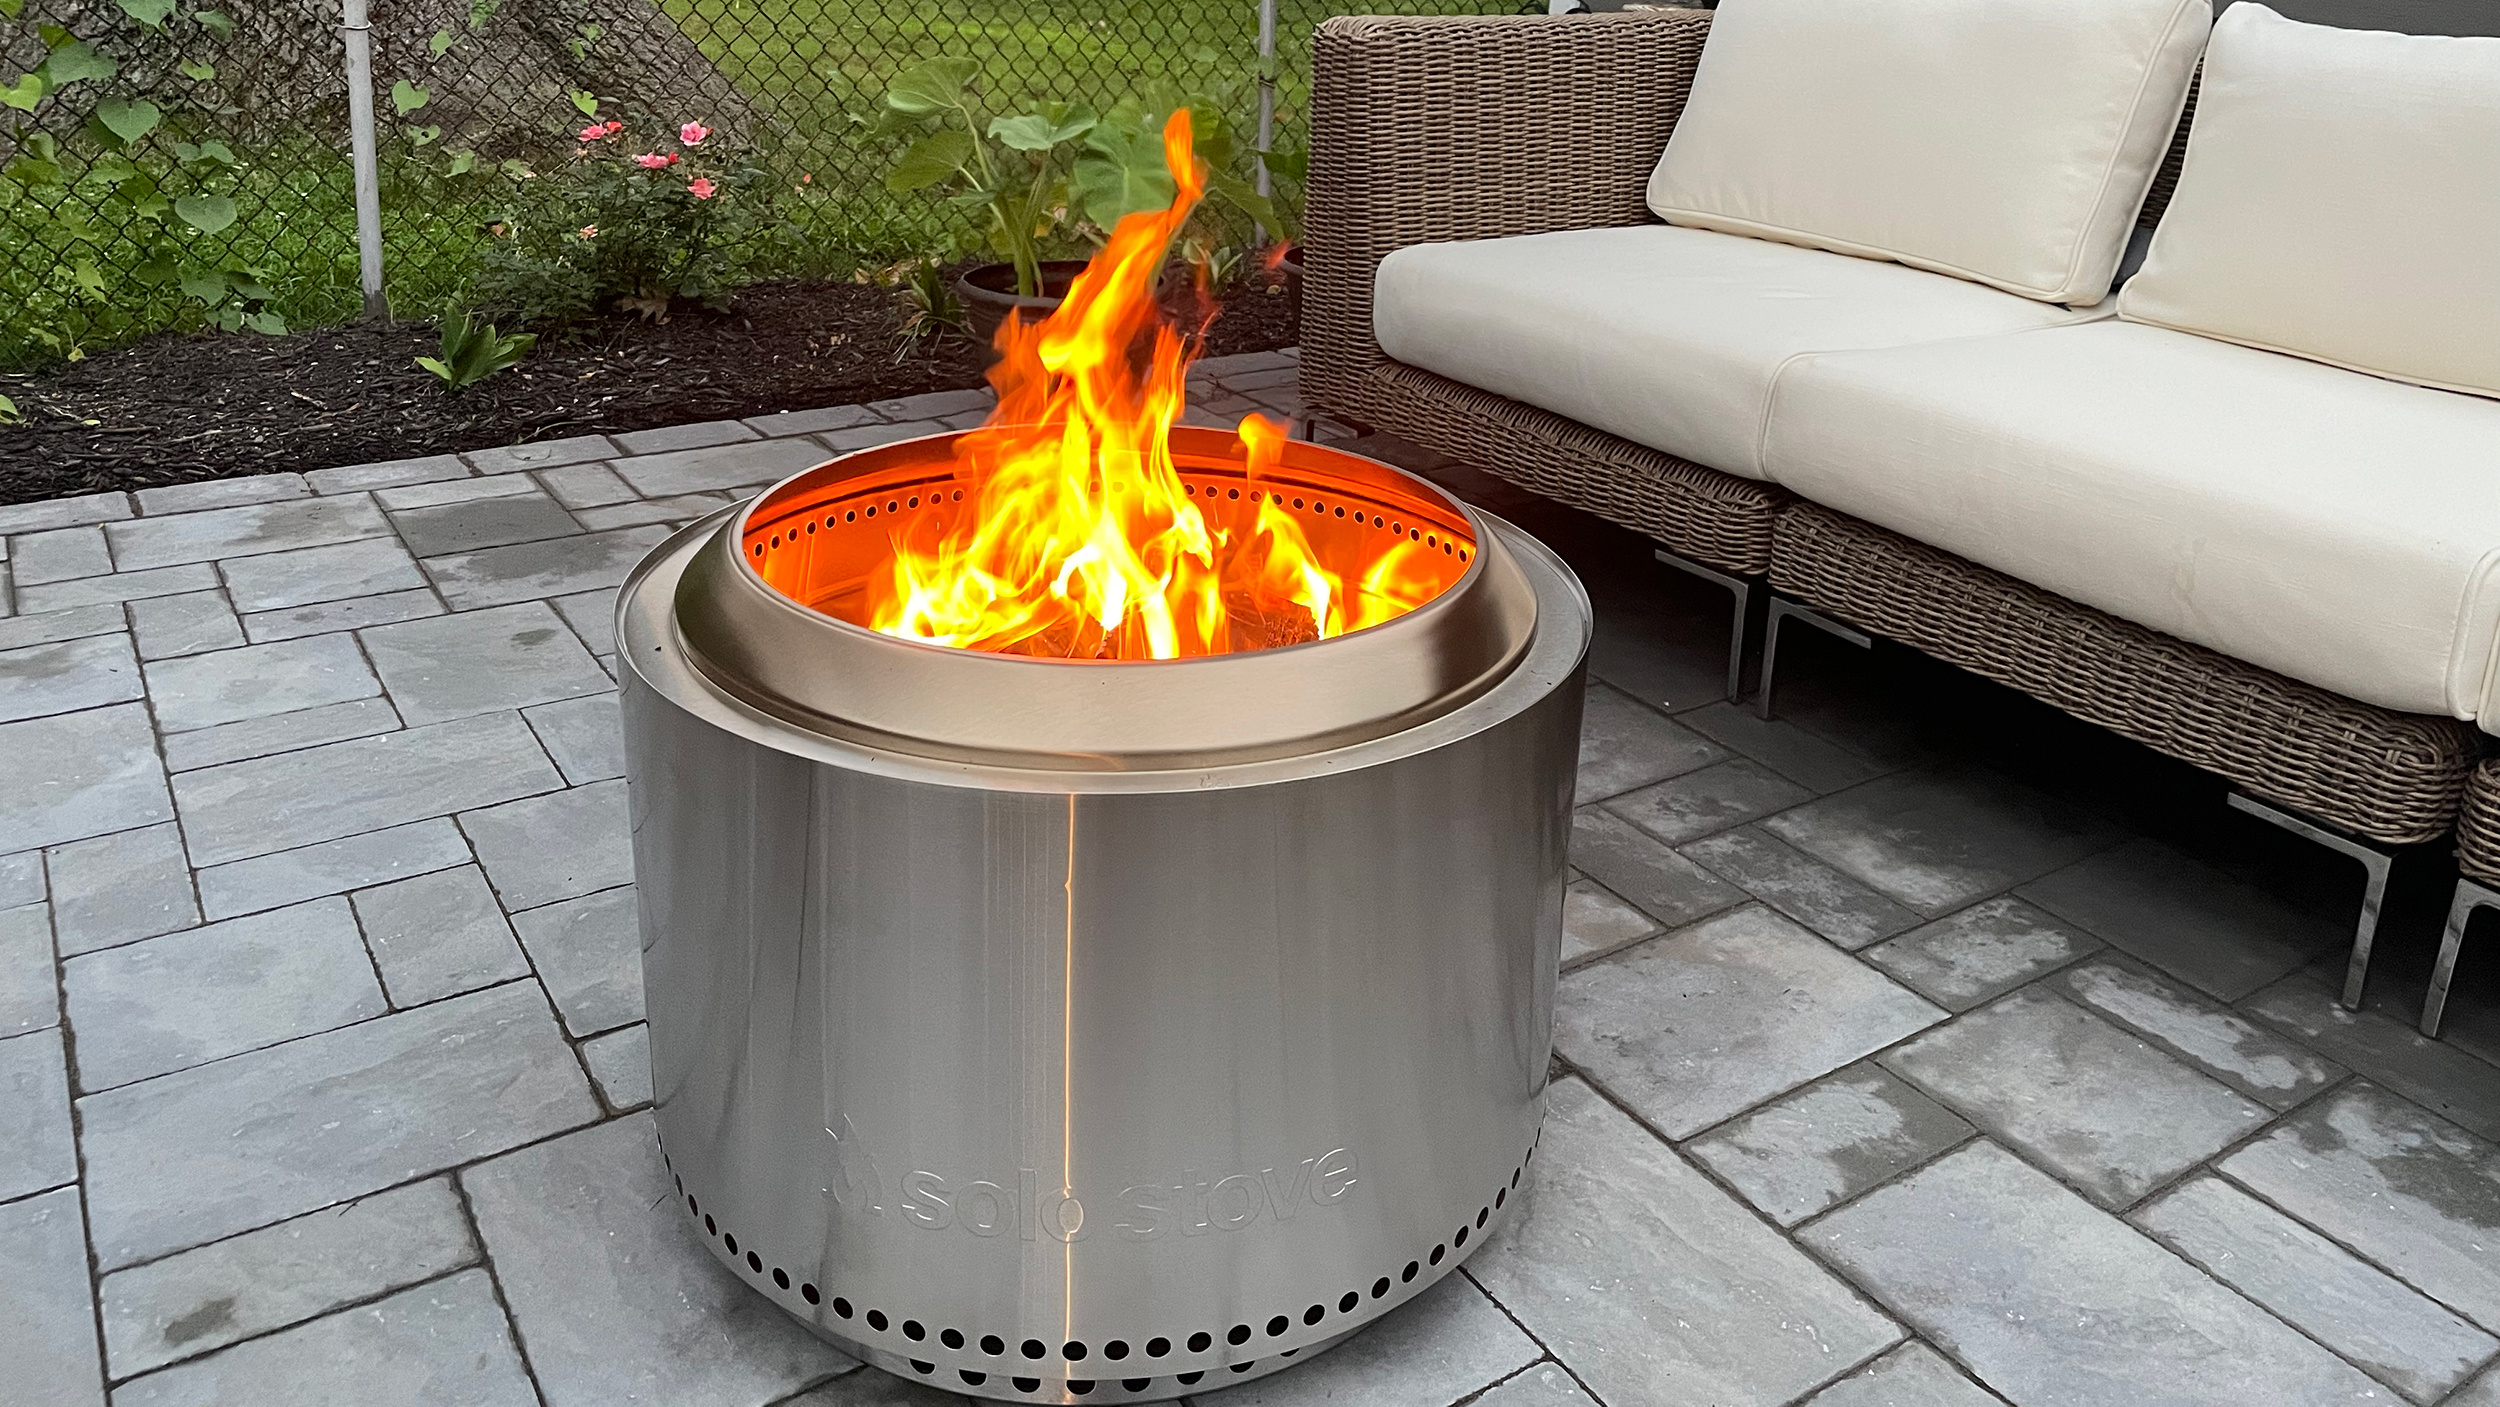 Solo Stove Yukon Fire Pit, How To Have A Fire Pit Without Smoke